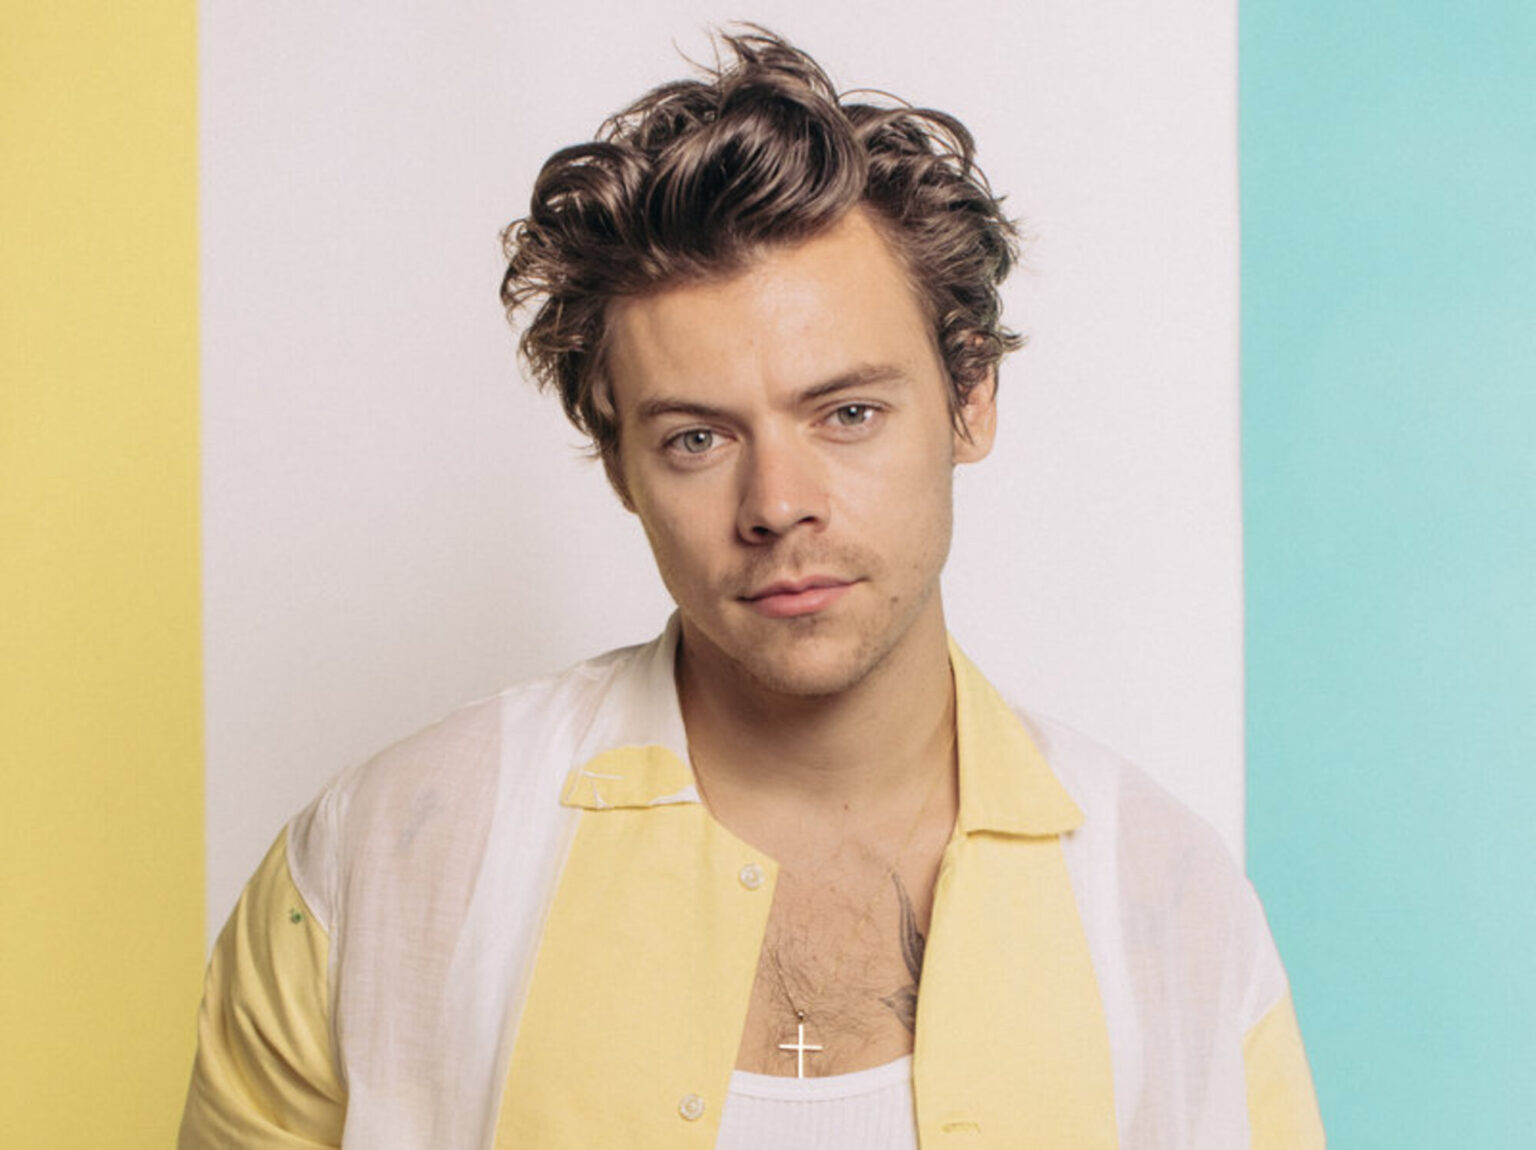 Harry Styles may be one of the world's most beloved celebs, but didn't he learn anything from 2020? Find out why fans are upset with the star here.